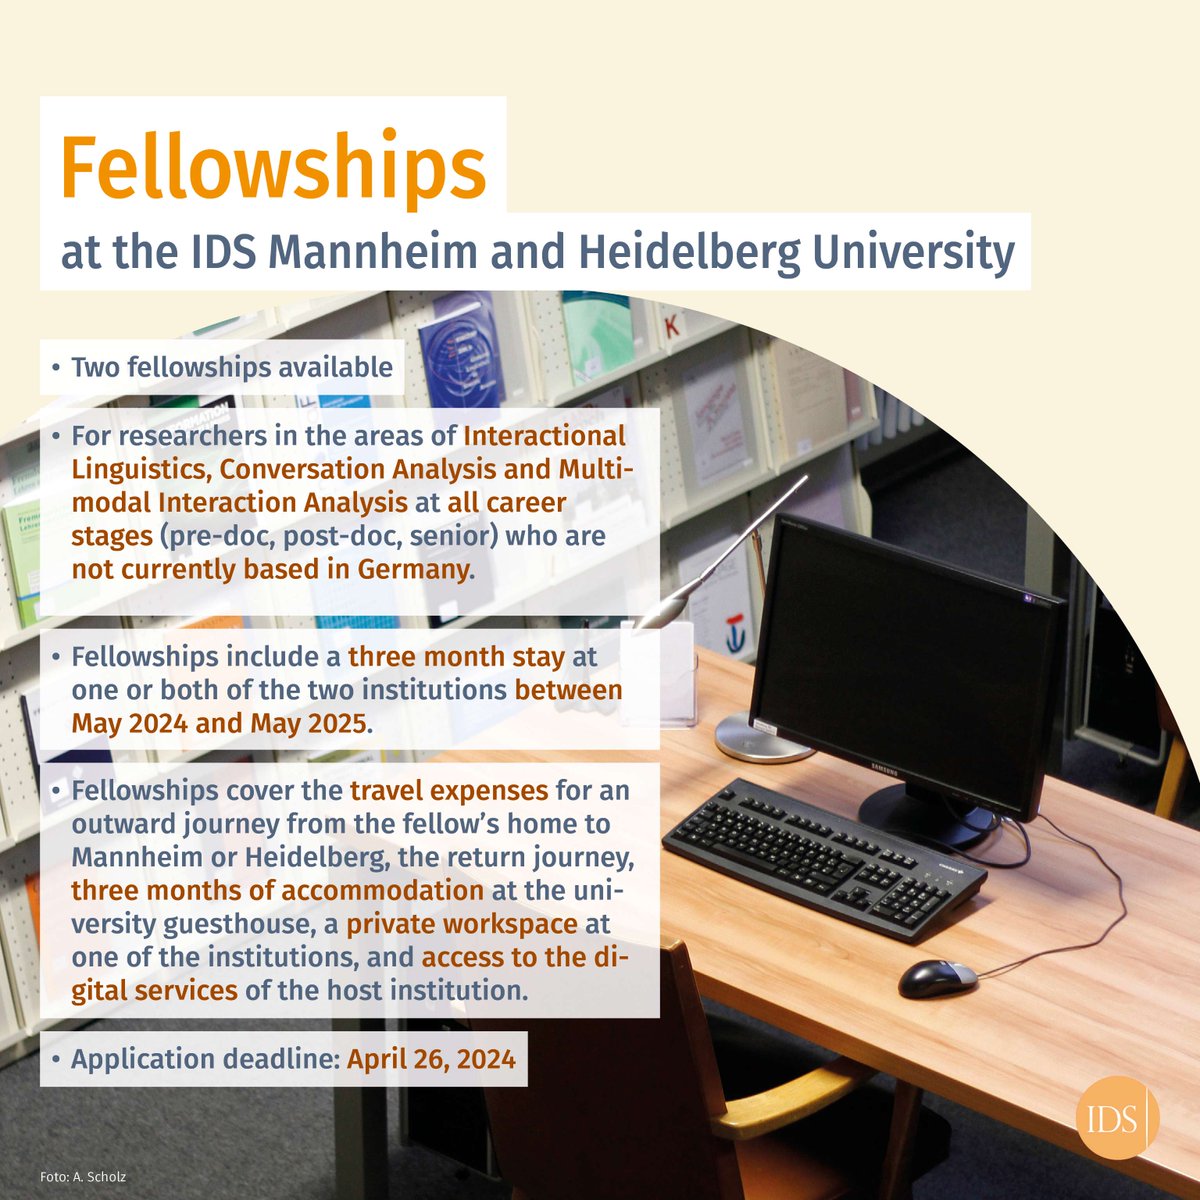 The IDS and the @UniHeidelberg offer two fellowships for researchers of #InteractionalLinguistics, #ConversationAnalysis and #MultimodalInteractionAnalysis at all career stages who are not currently based in Germany. Application deadline: April 26, 24. ➡️ ids-mannheim.de/org/karriere/s…